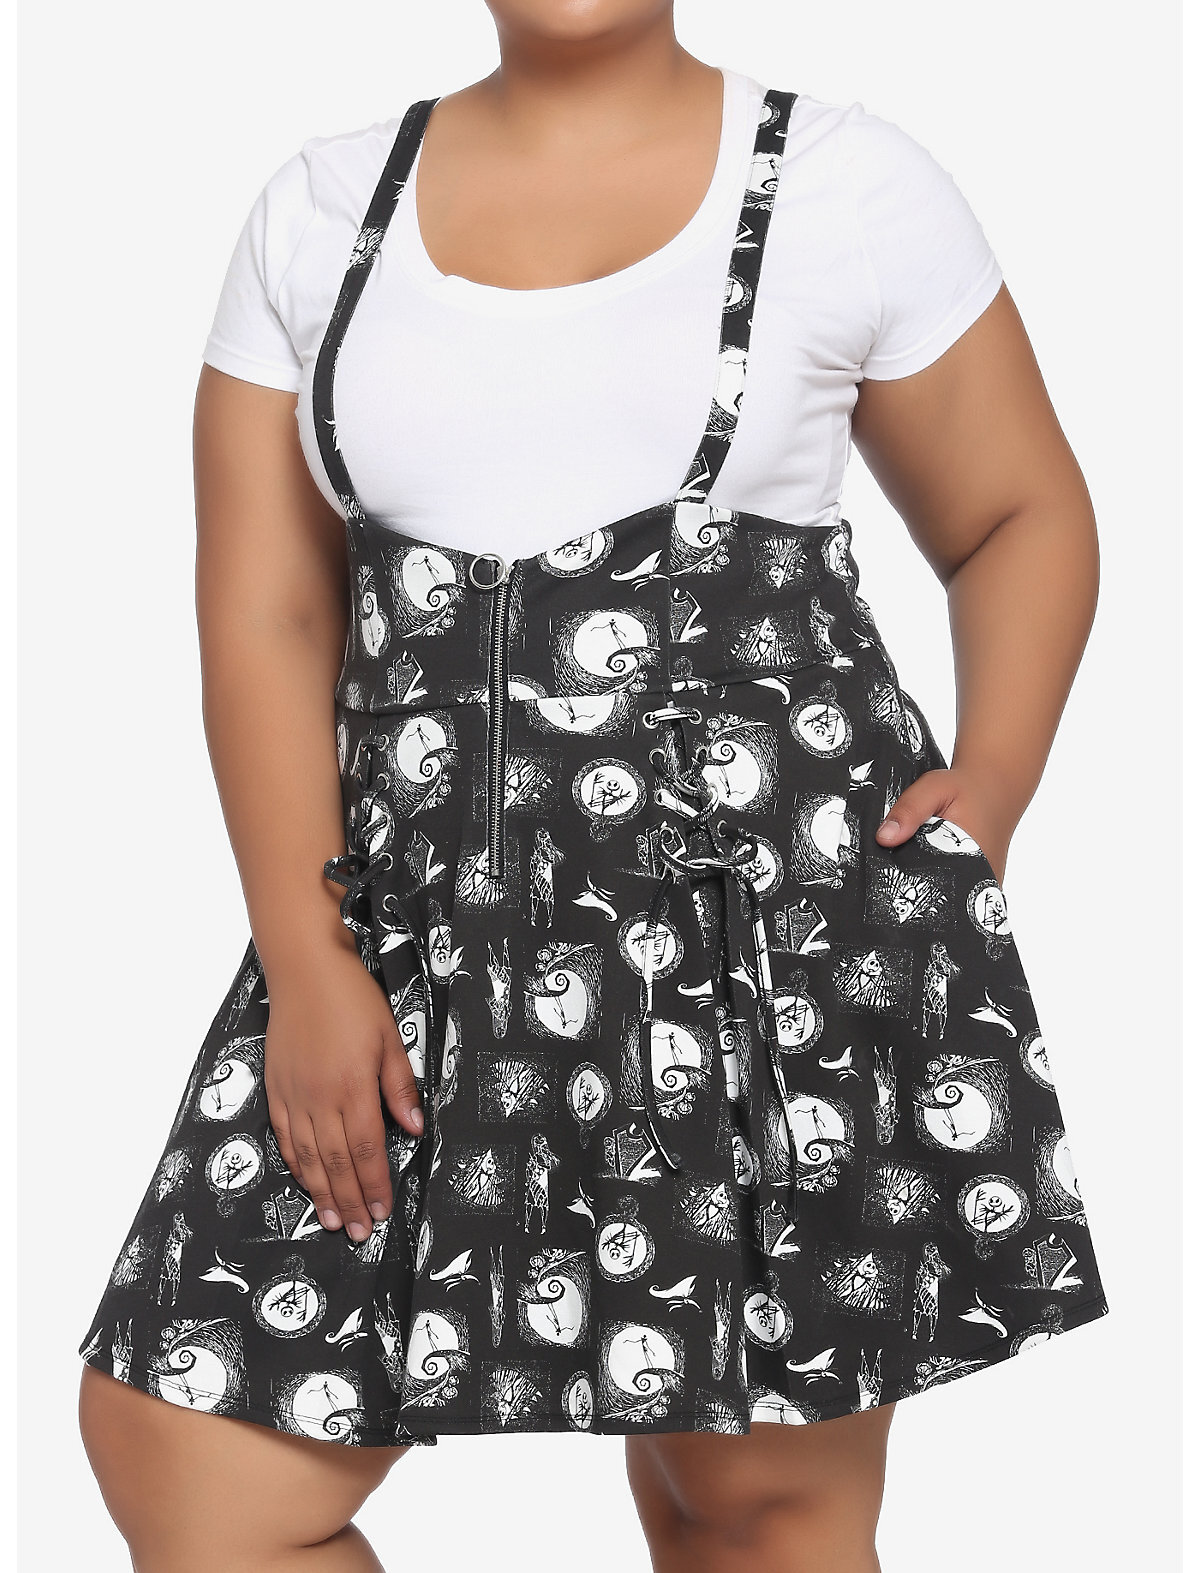 The Nightmare Before Christmas O-Ring Suspender Skirt Plus Size